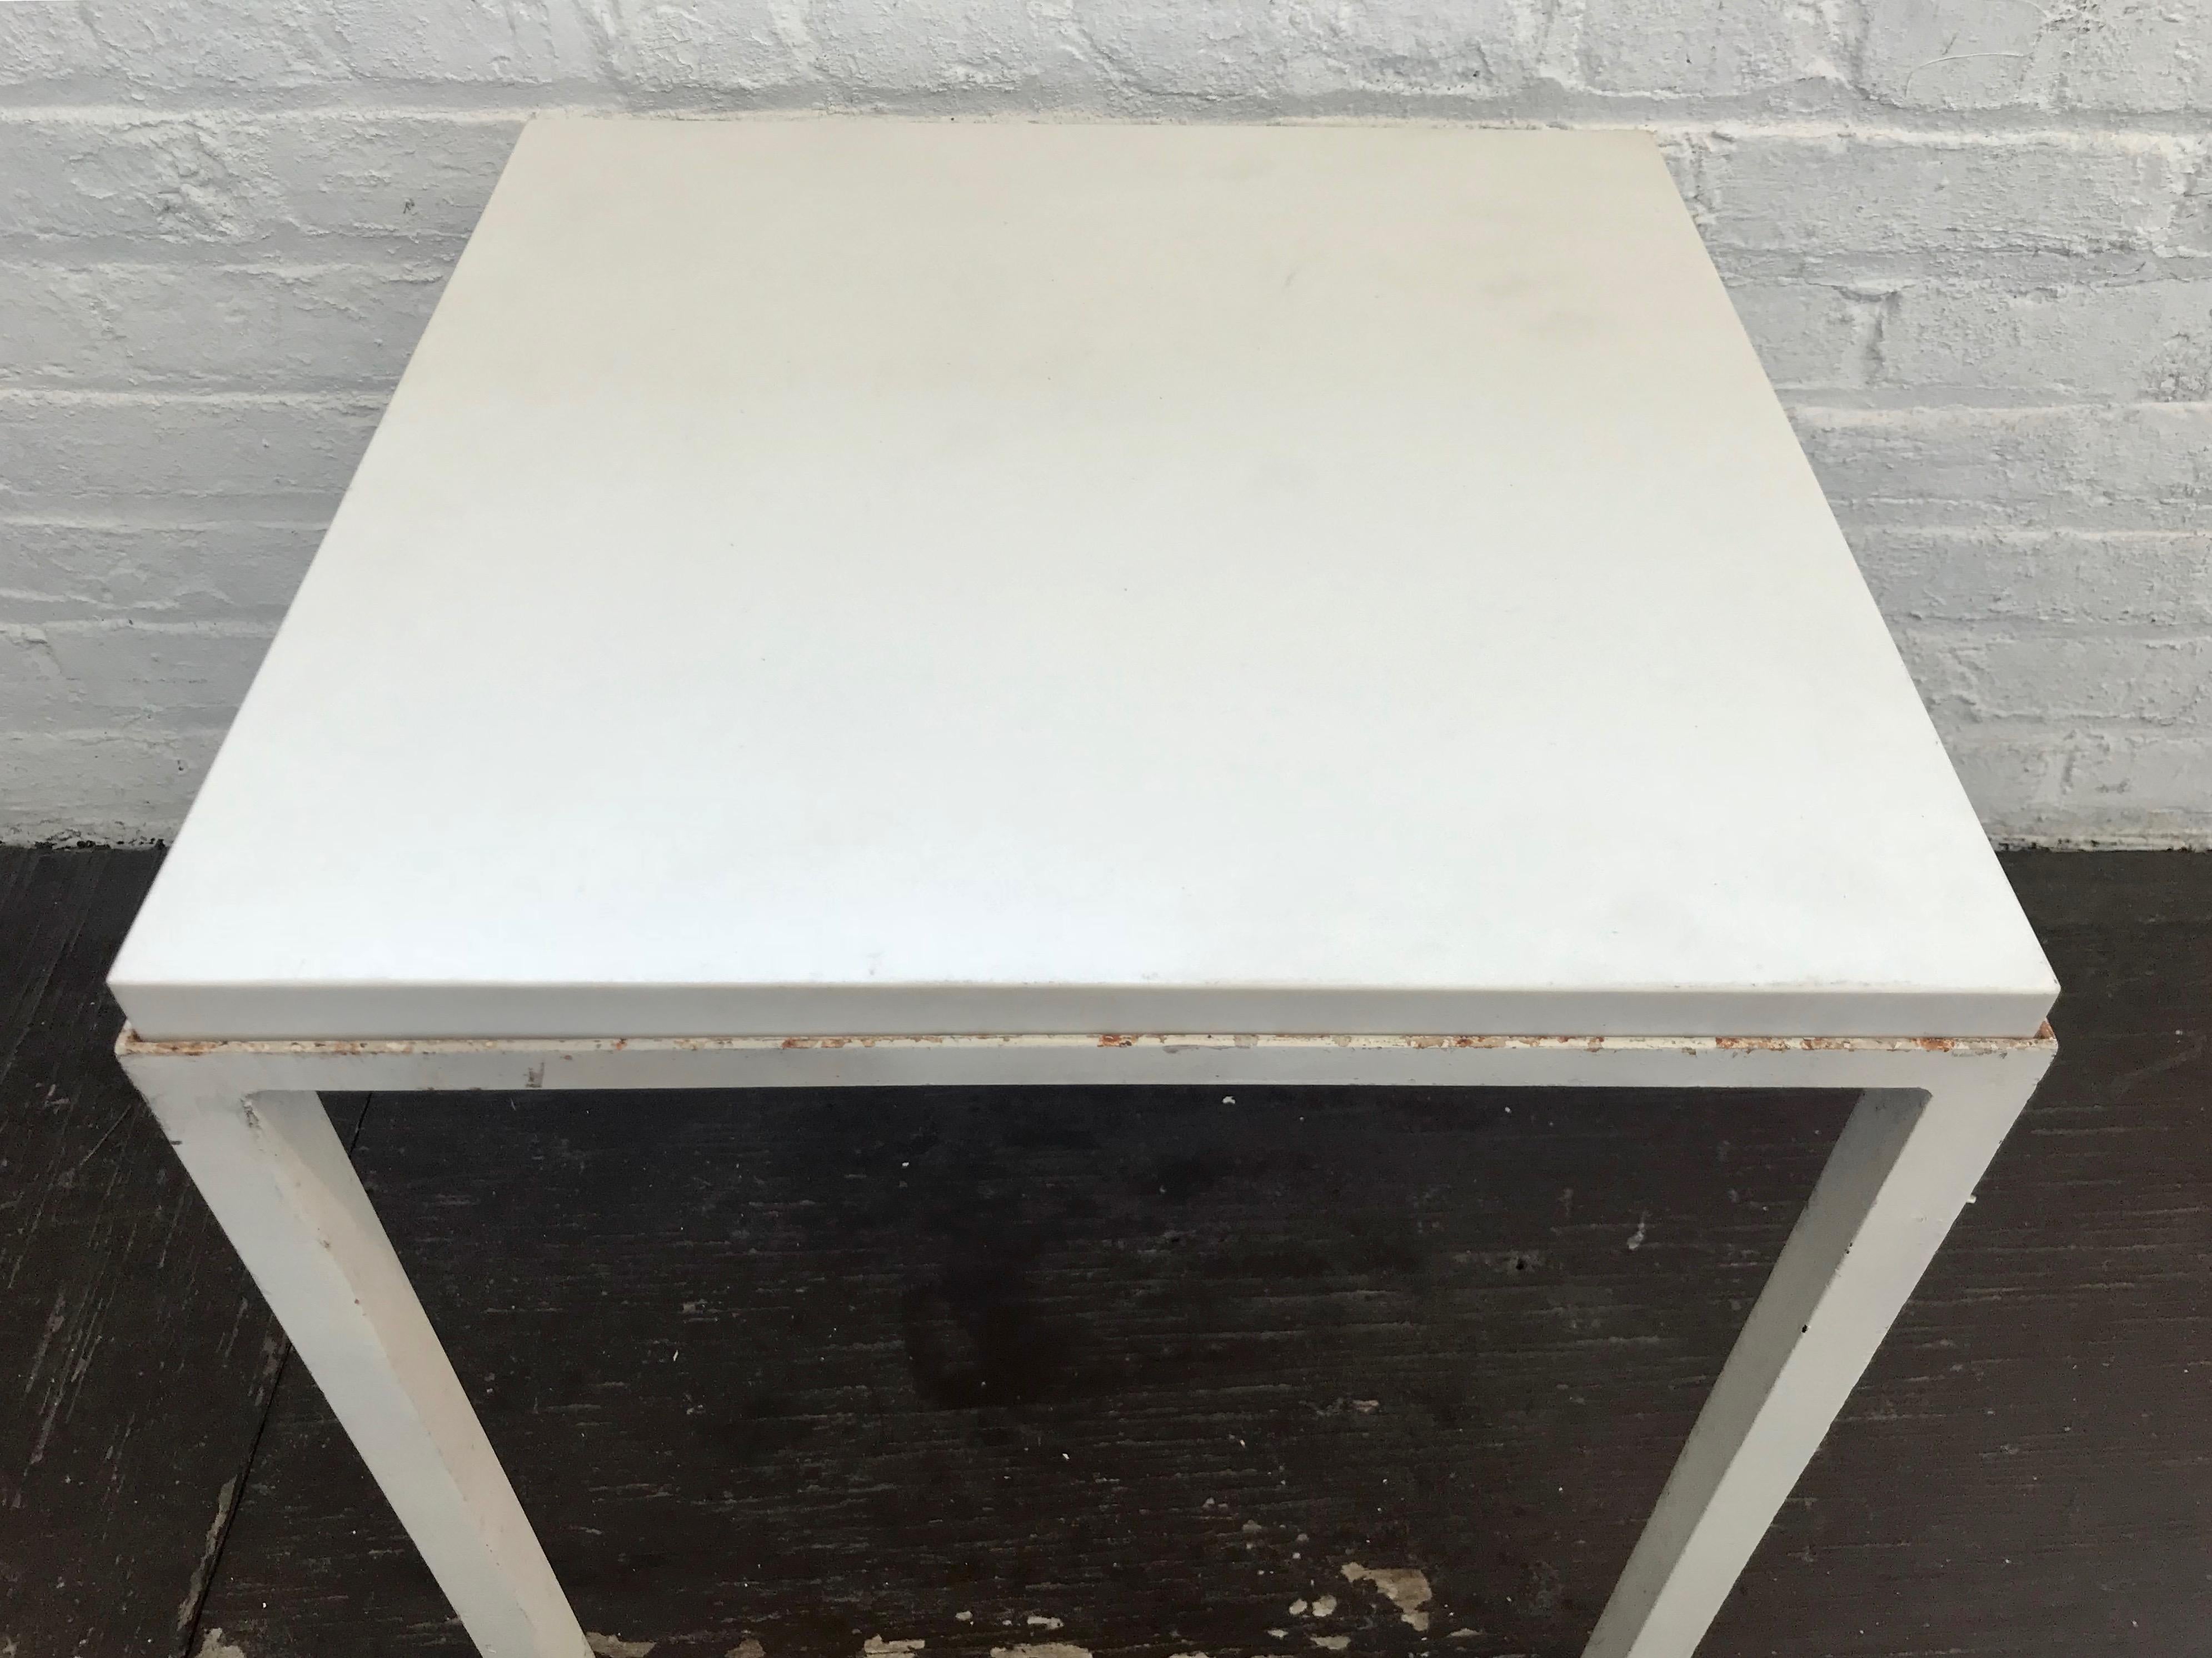 Pair of White Enameled Metal and Granite Side Tables, USA, circa 1955 For Sale 10